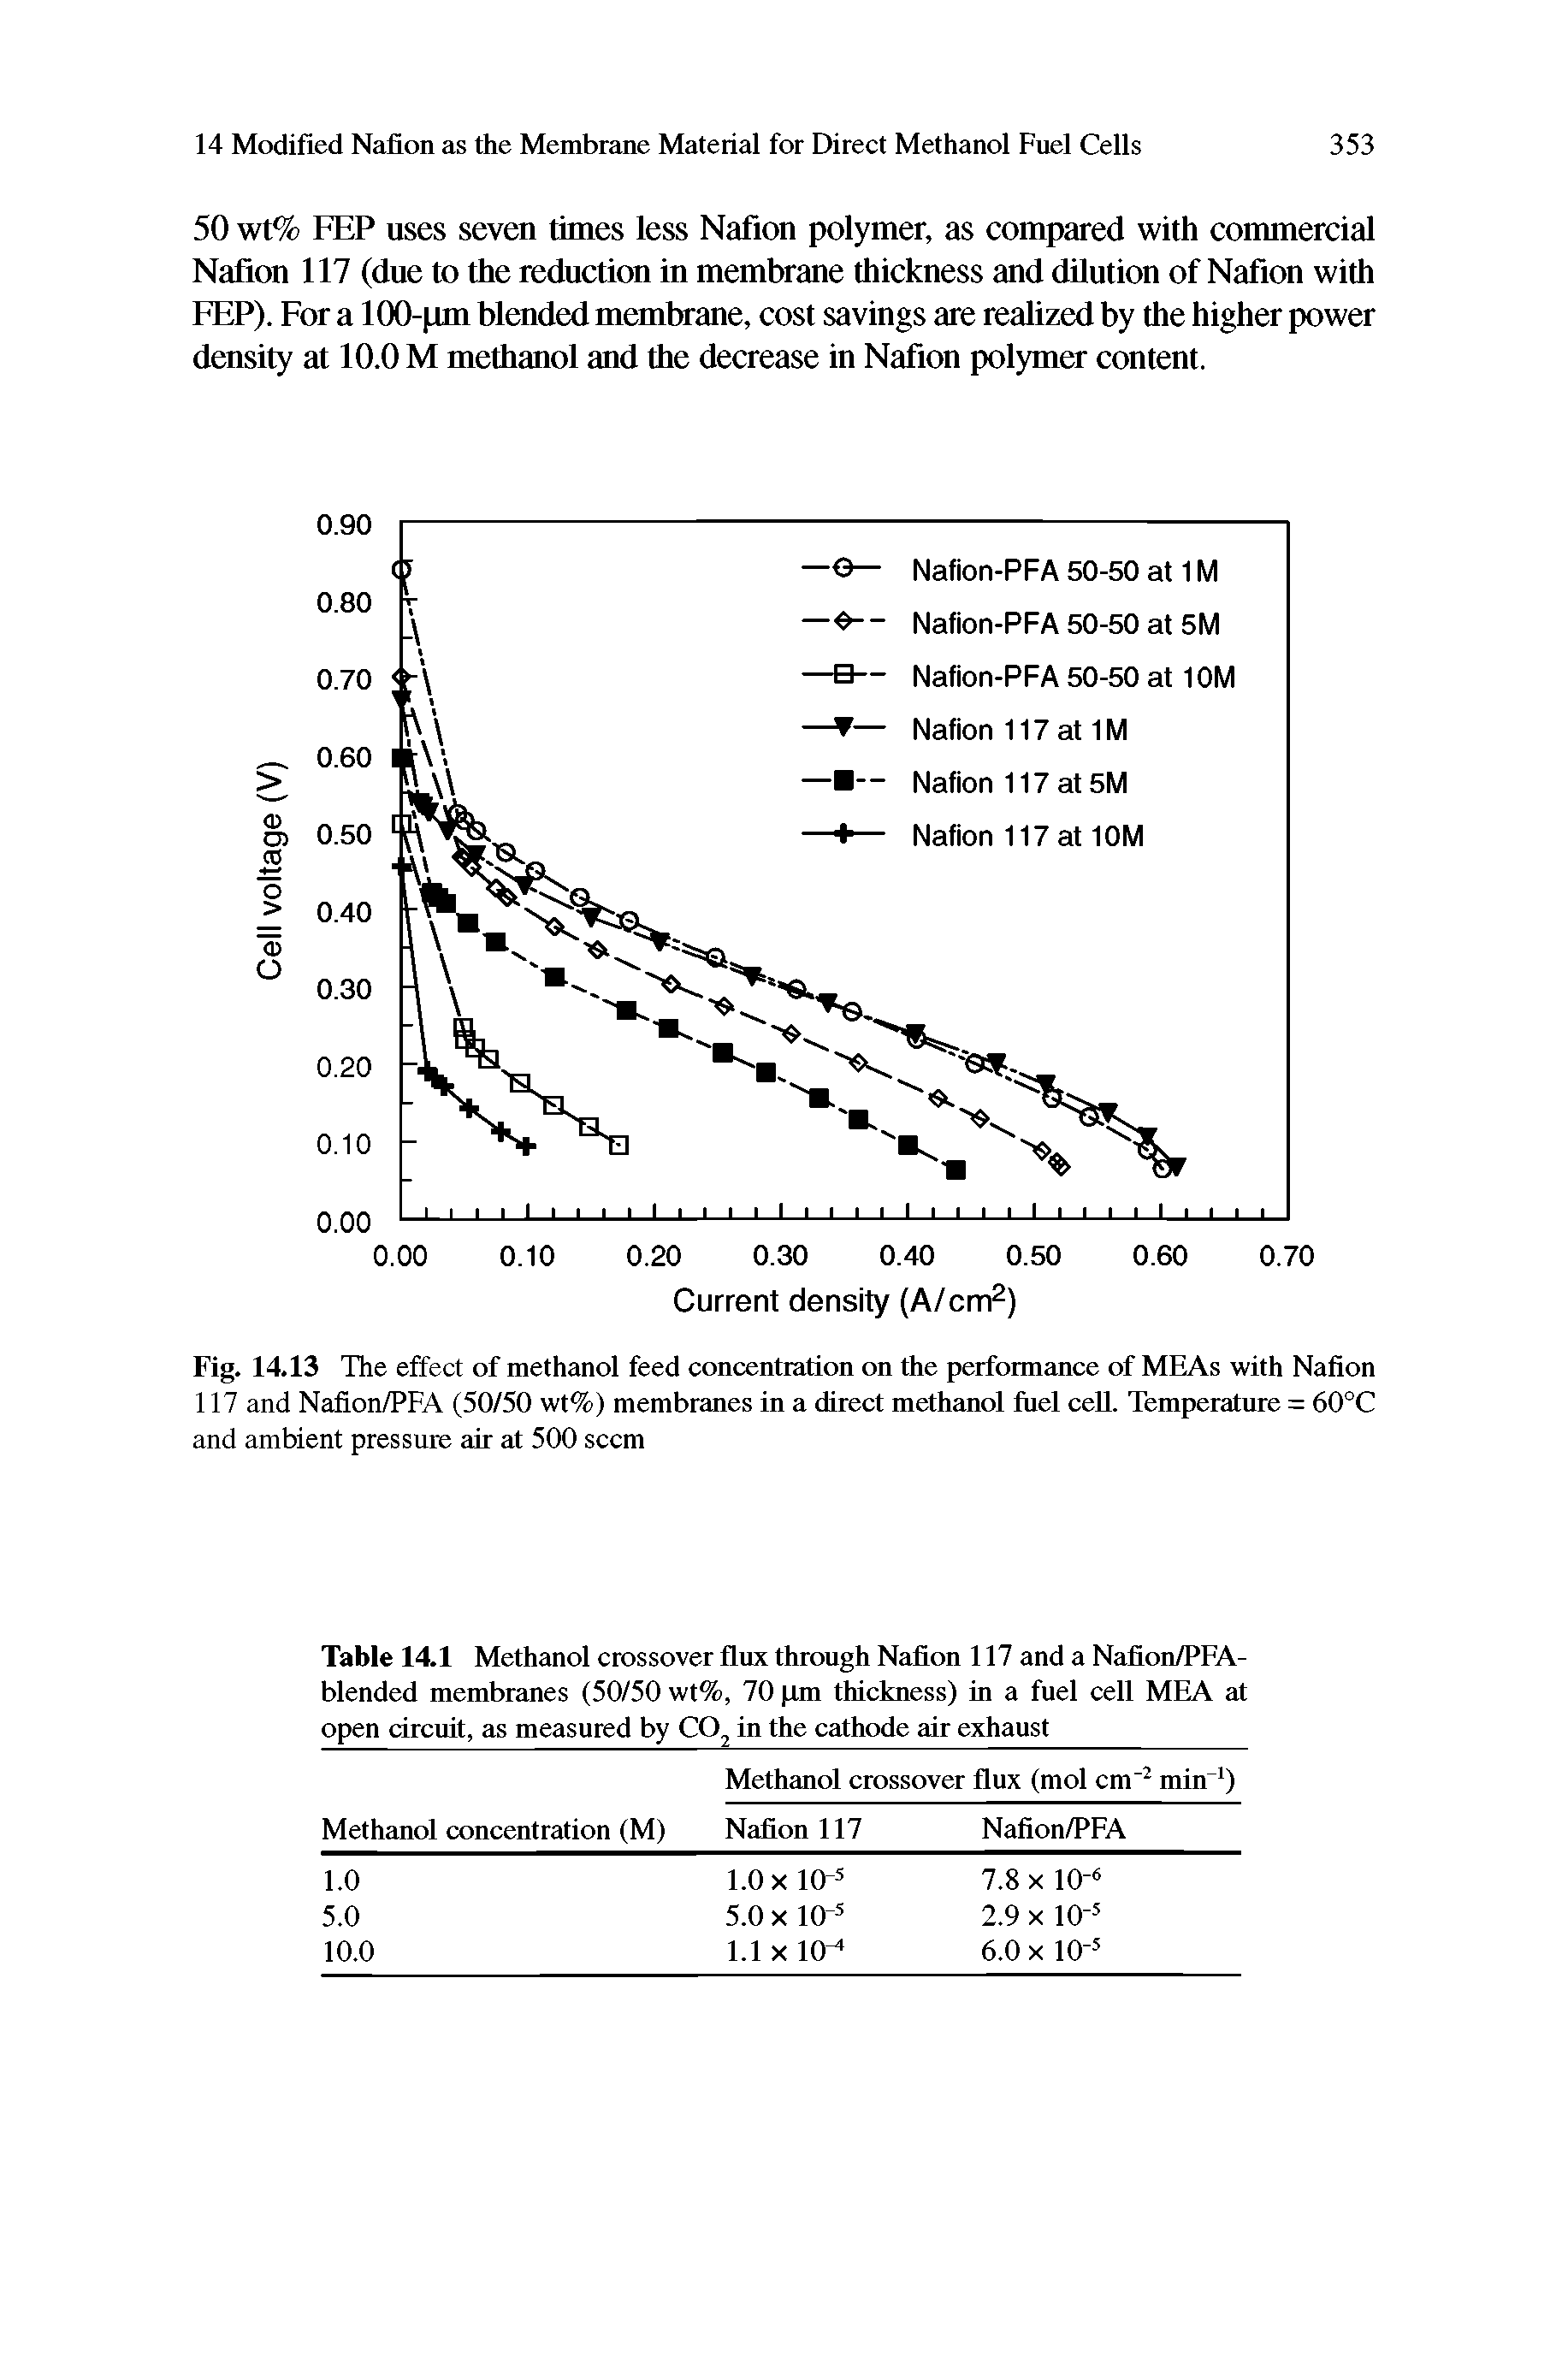 Table 14.1 Methanol crossover flux through Nafion 117 and a Nafion/PFA-blended membranes (50/50 wt%, 70 pm thickness) in a fuel cell MEA at open circuit, as measured by CO, in the cathode air exhaust ...